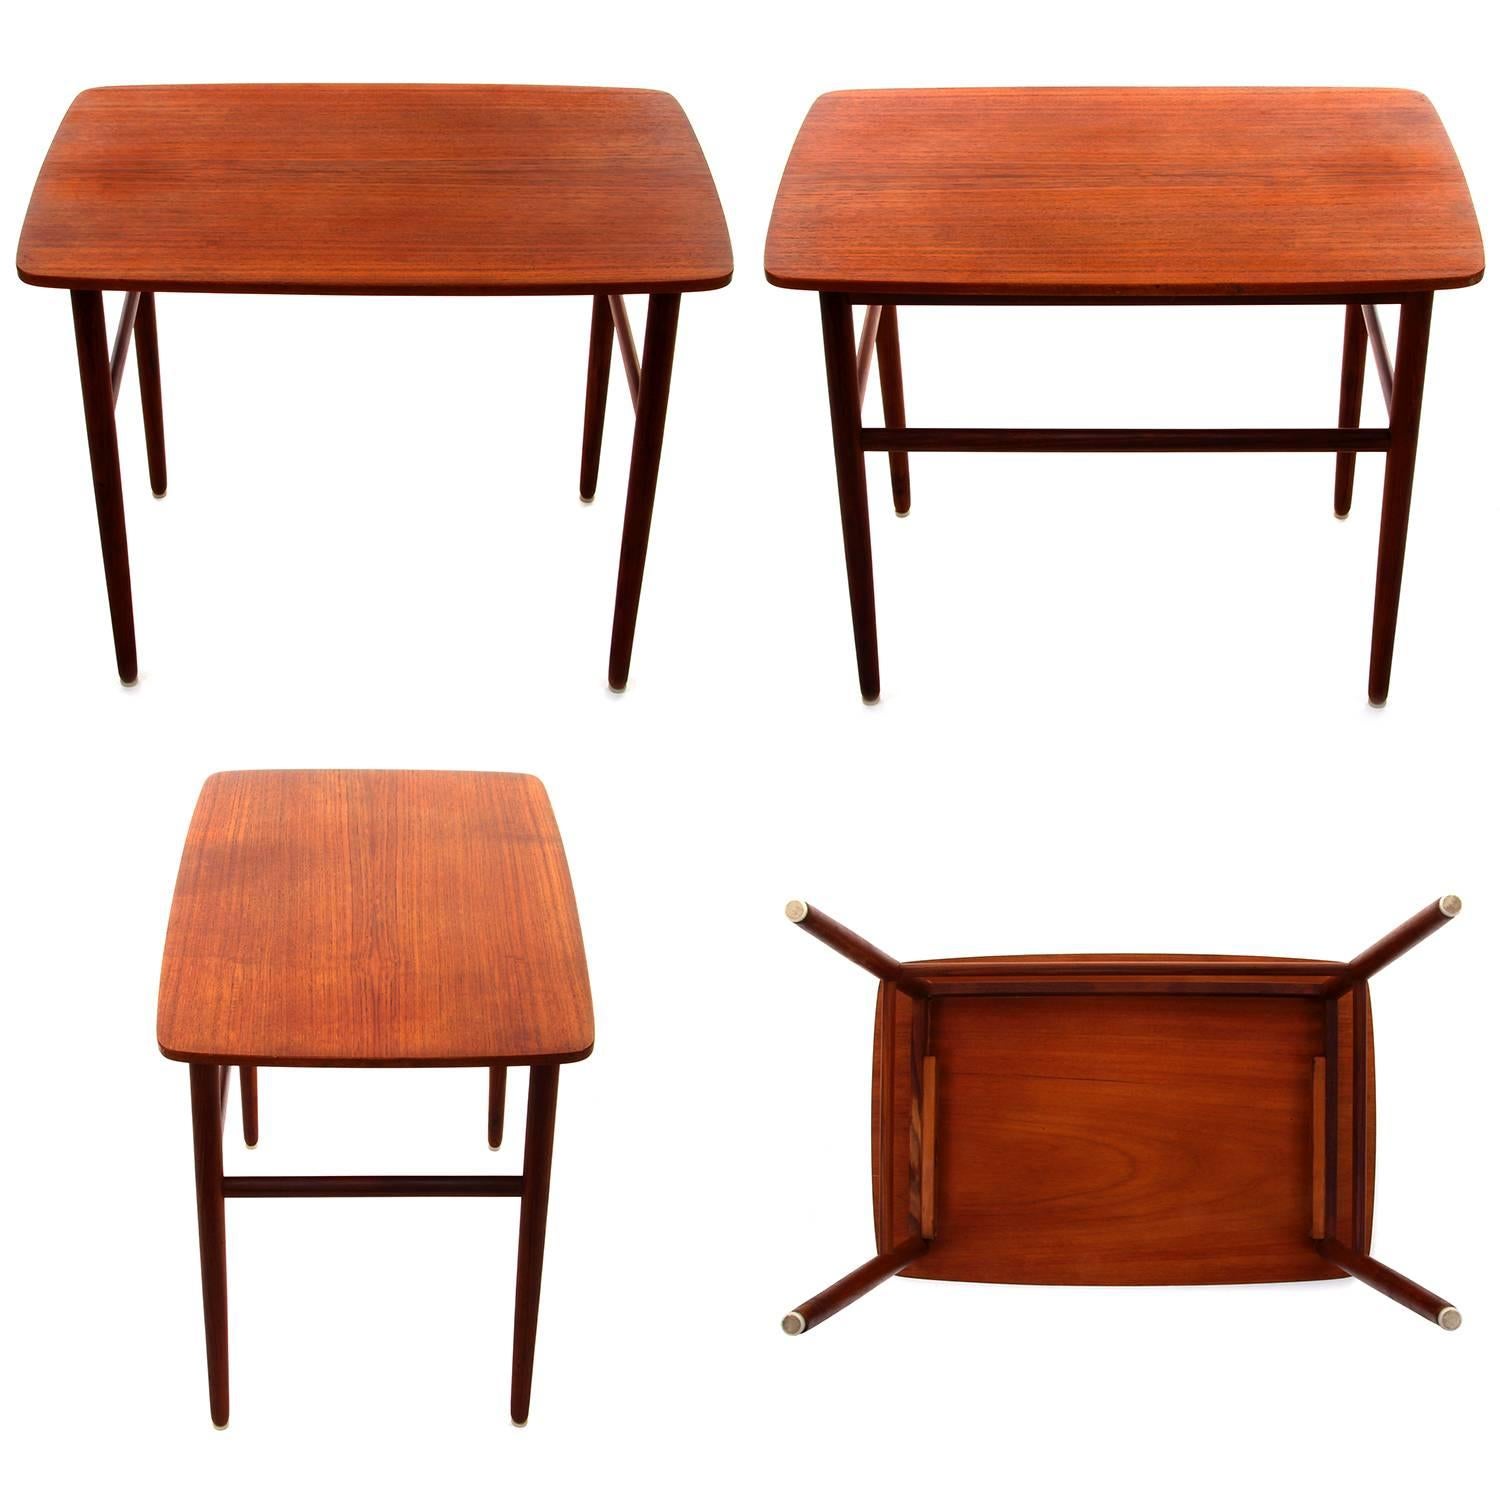 Cane Teak and Rosewood Nesting Tables, 1950s, Danish Mid-Century Modern Nested Tables